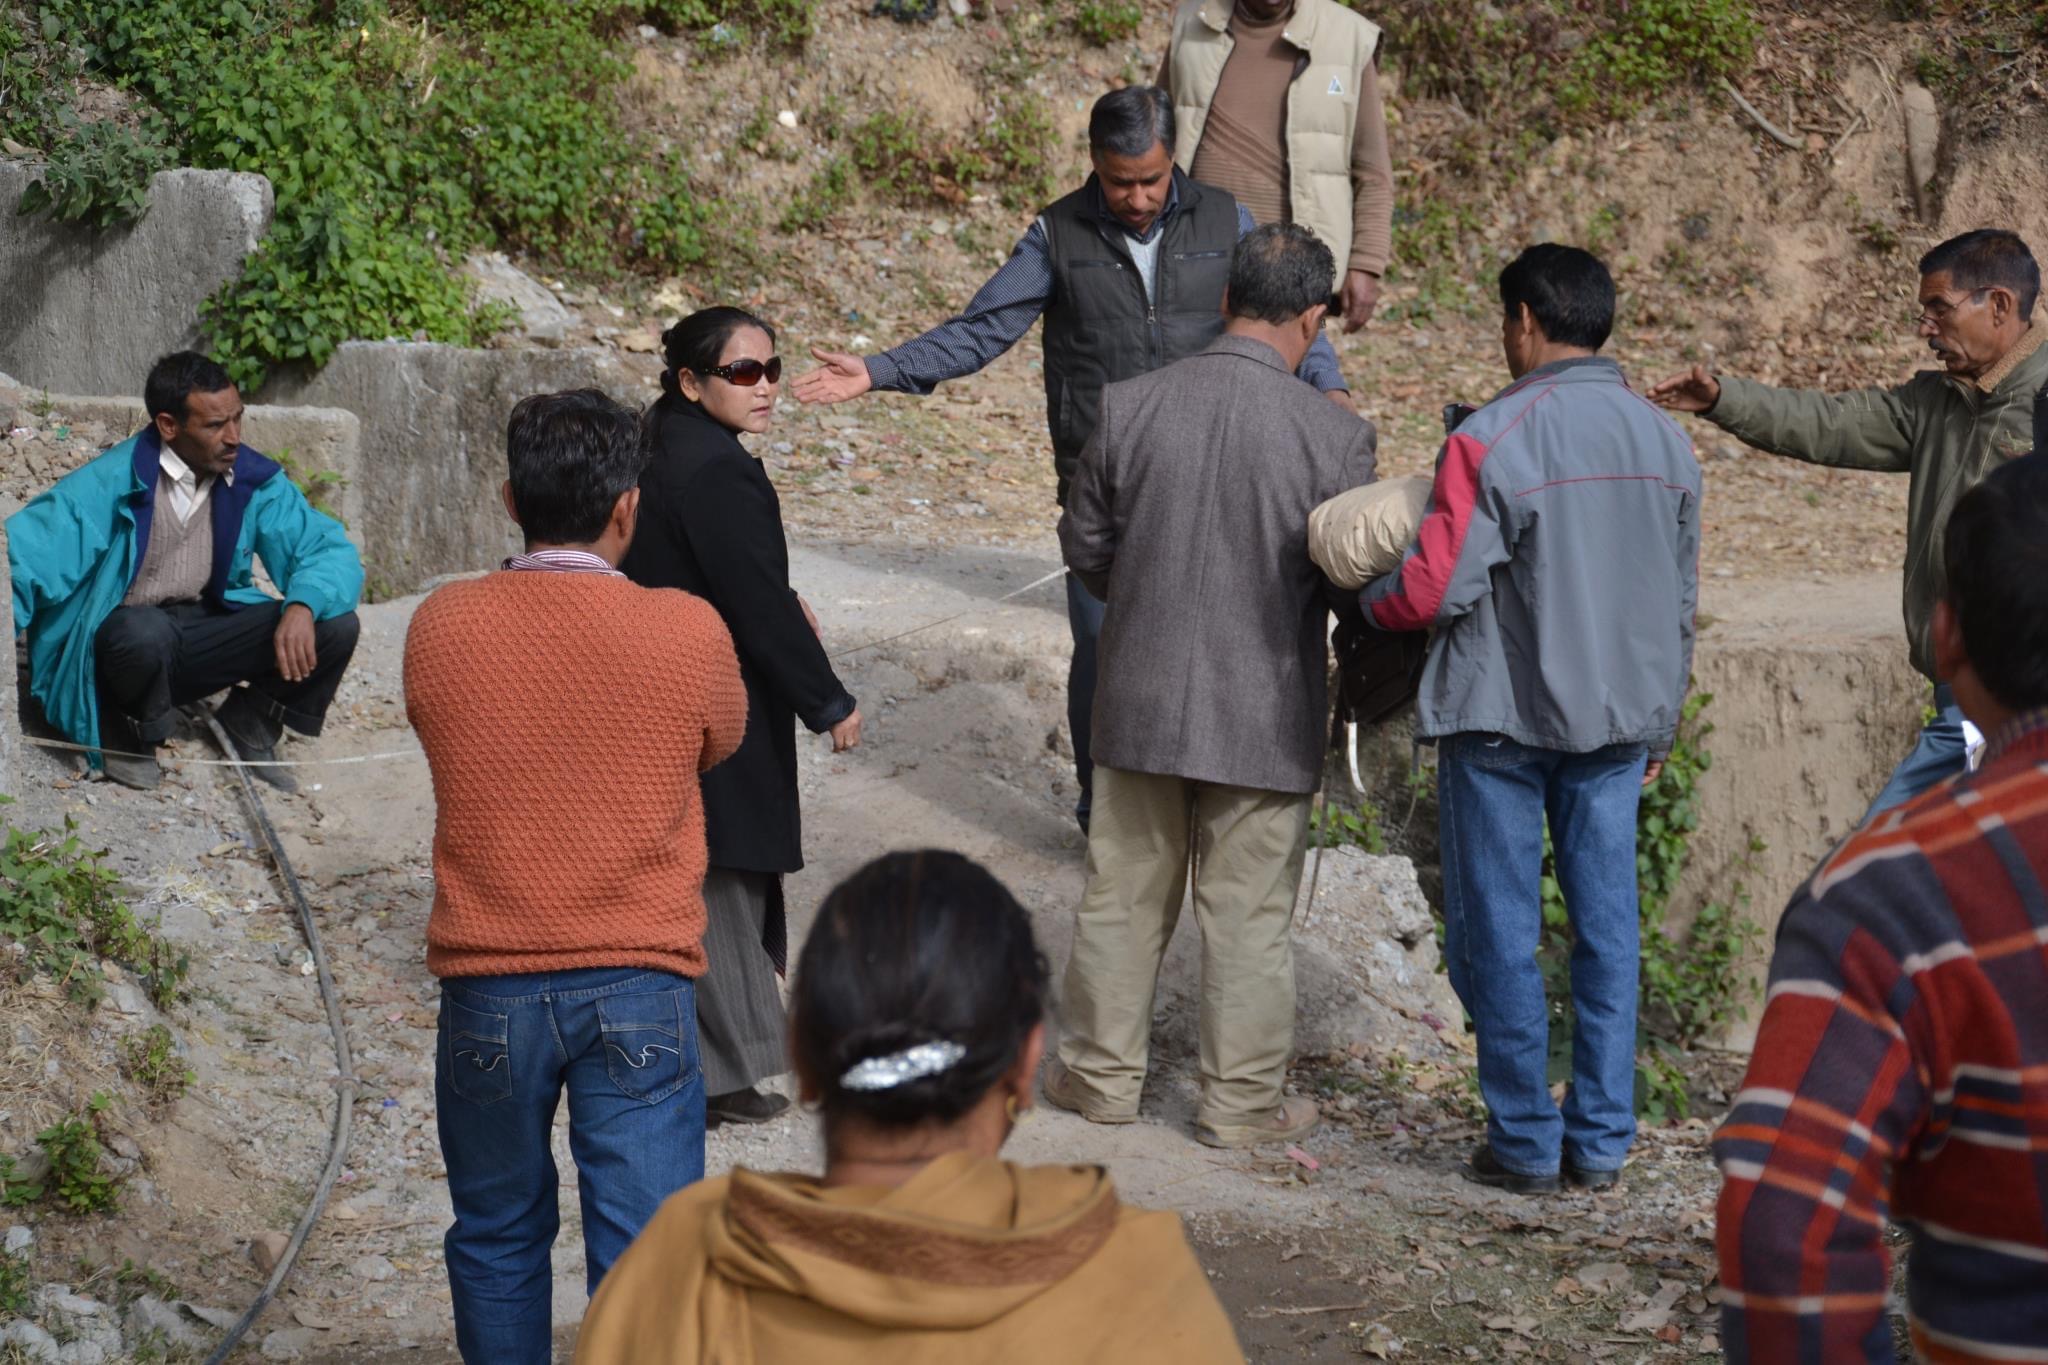 Mrs. Karma Dolma, as an officer of CTA's land revenue, carrying out the demarcation of CTA's land boundary below the Nechung Monastery in Dharamshala, HP, India, in 2012. 